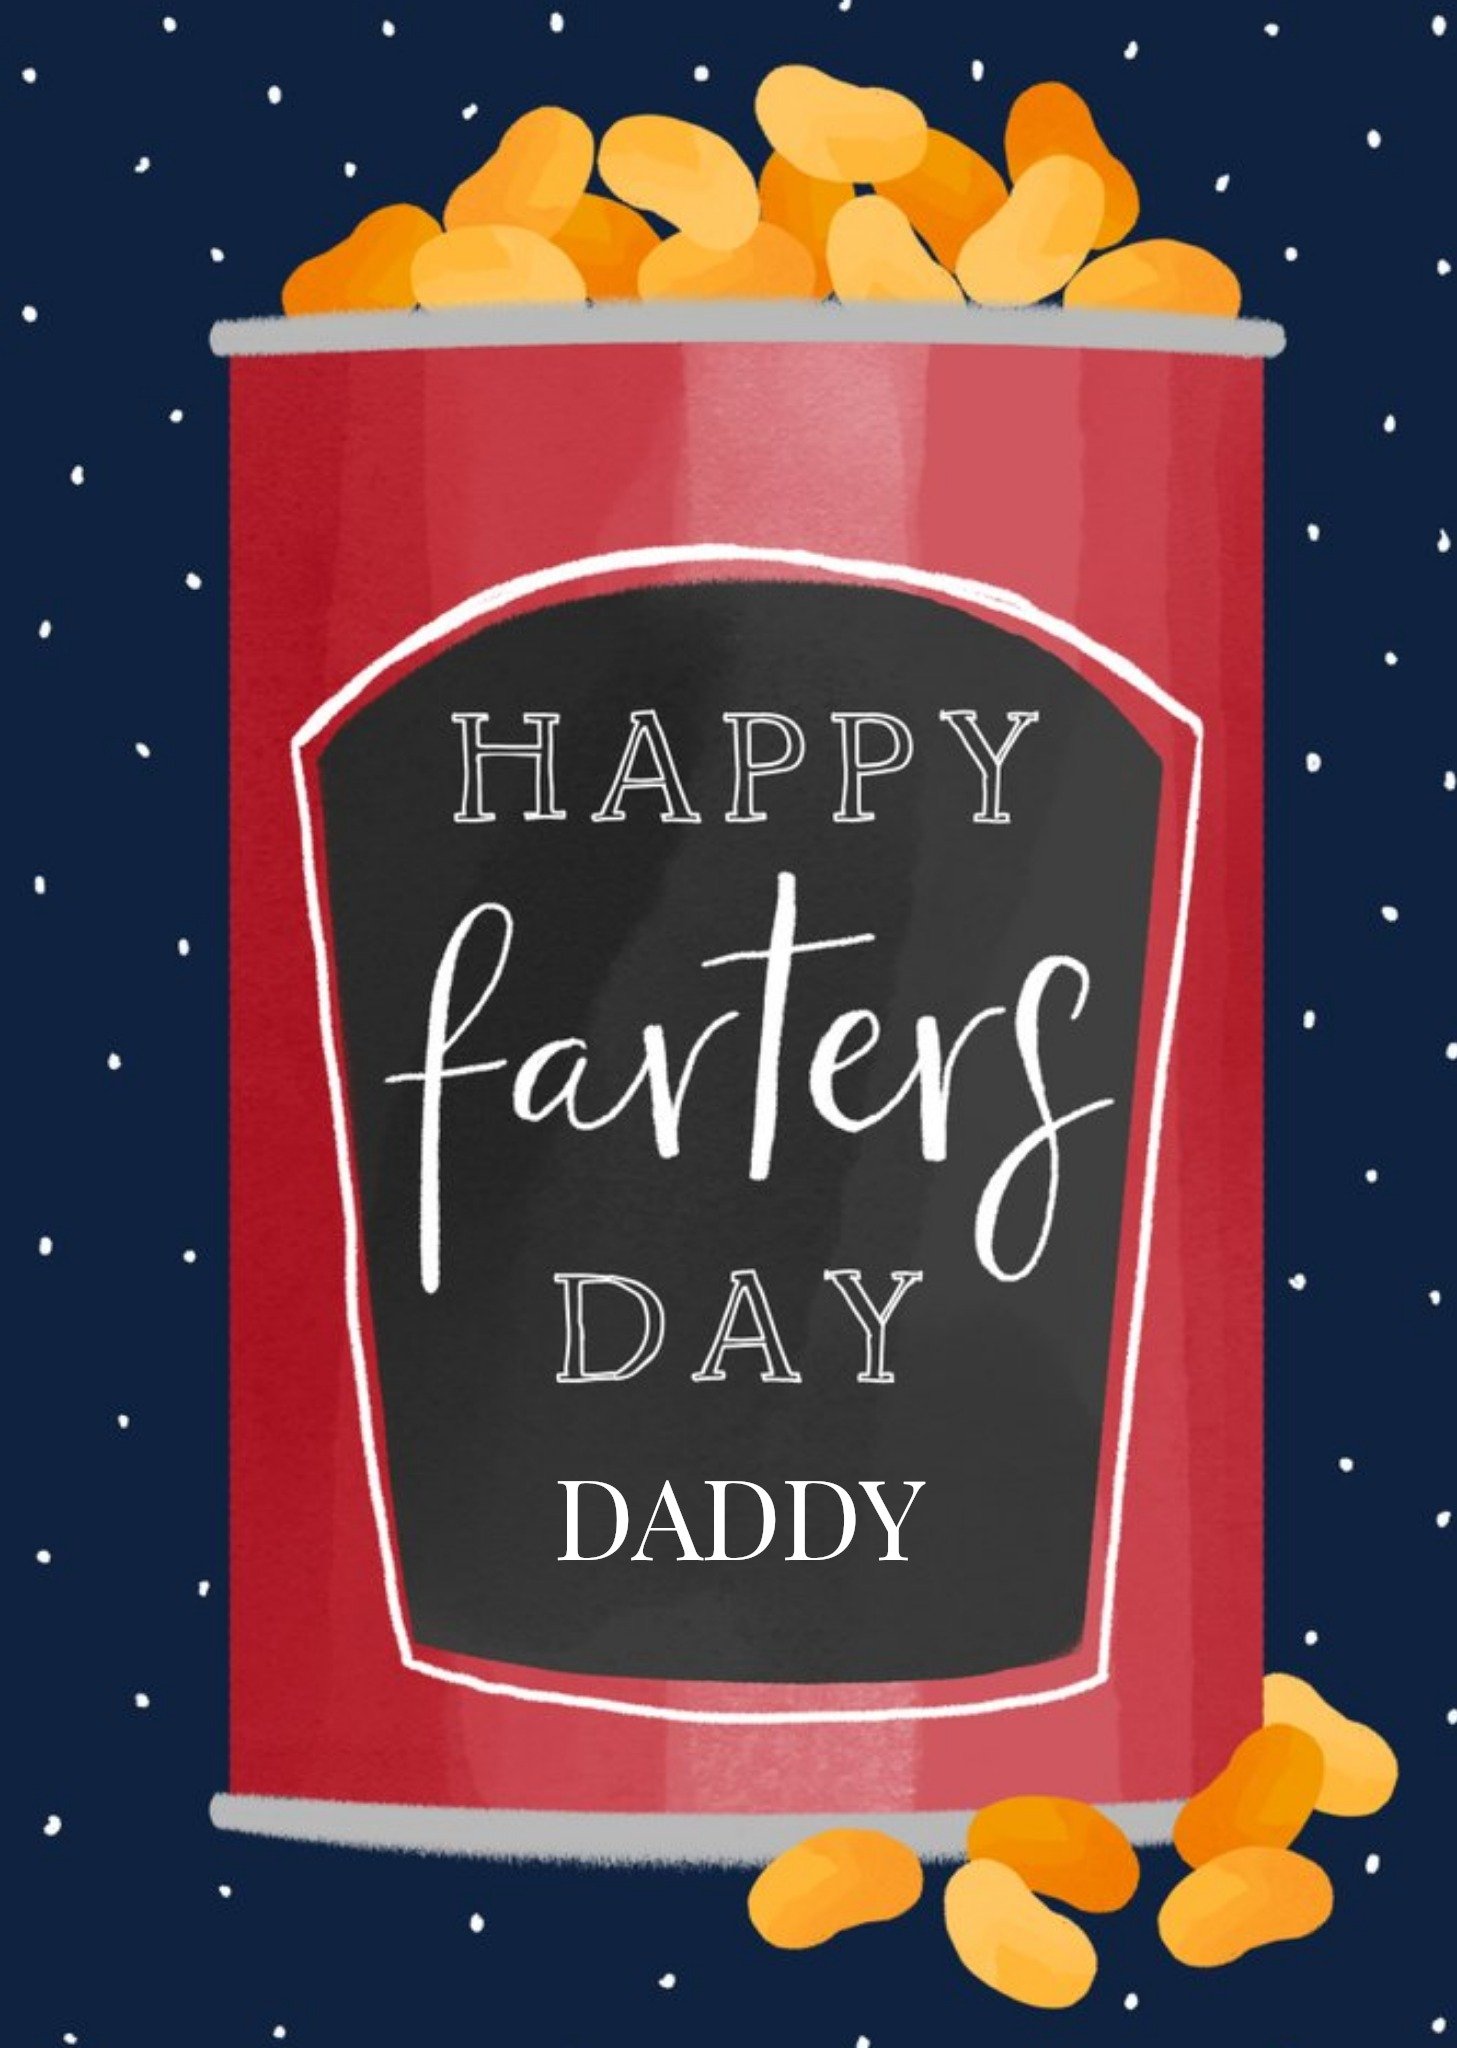 Okey Dokey Design Daddy Happy Farters Day Baked Beans Father's Day Card Ecard